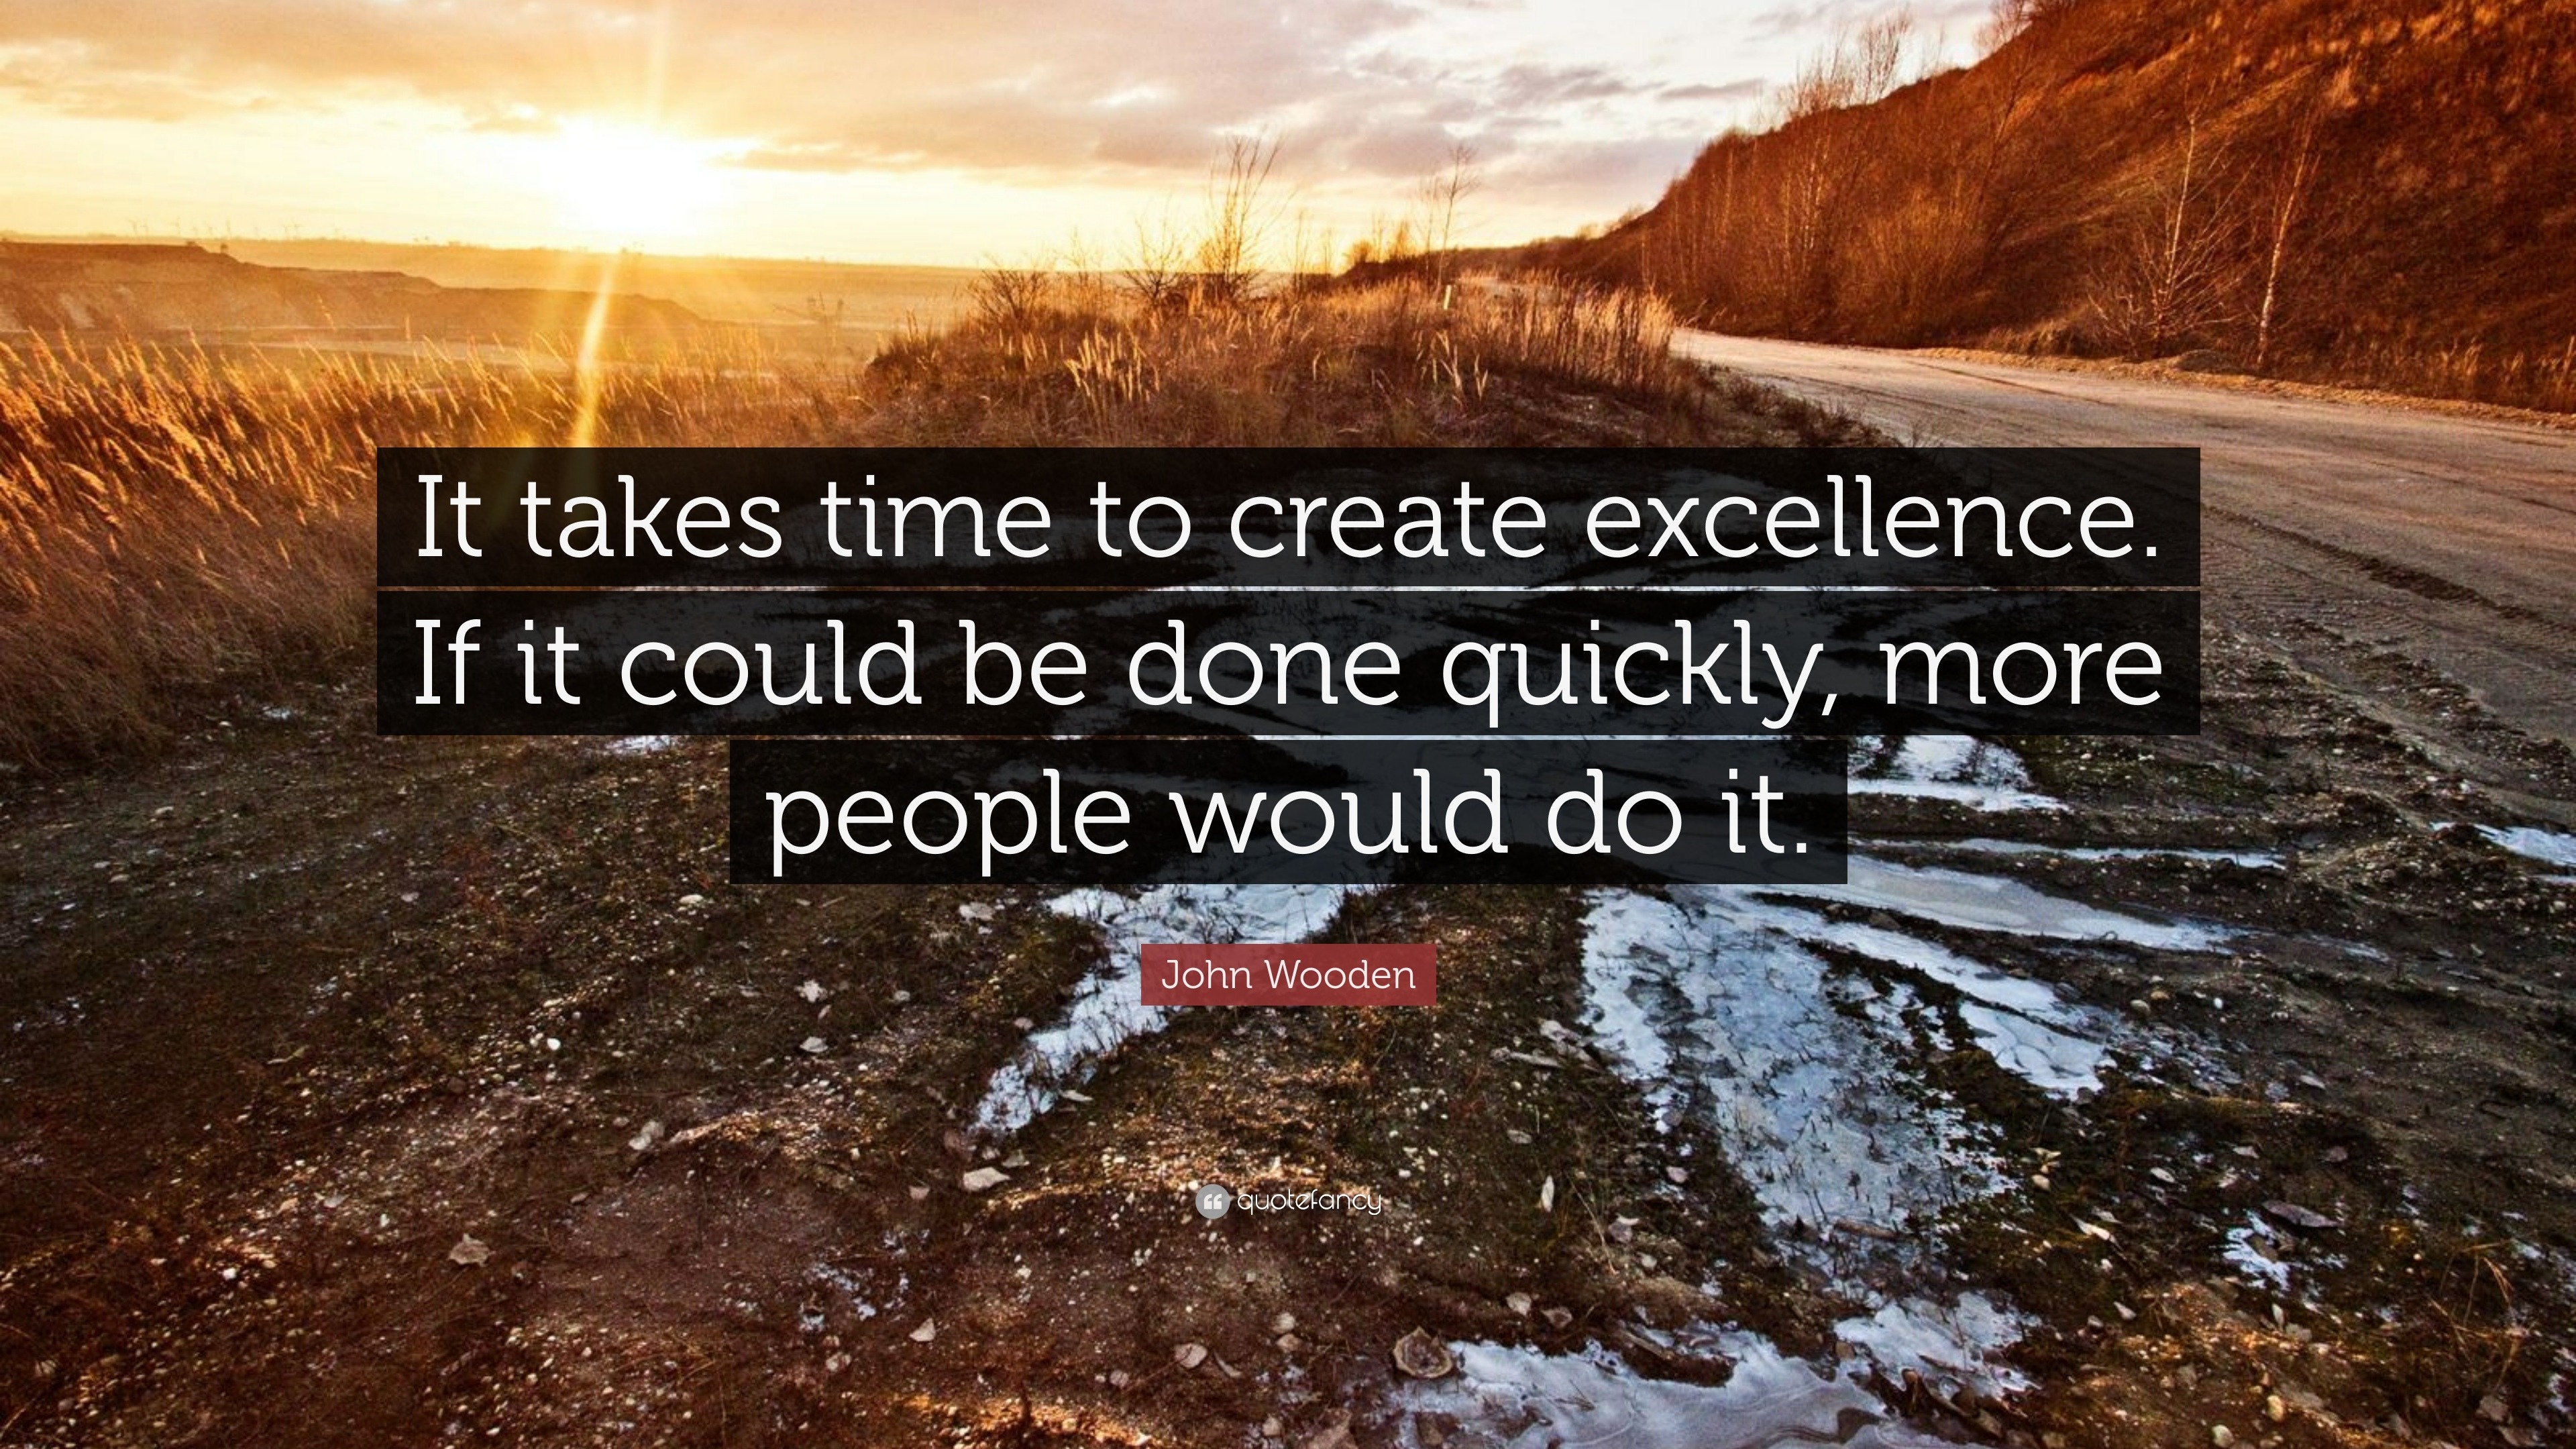 John Wooden Quote “It takes time to create excellence. If it could be